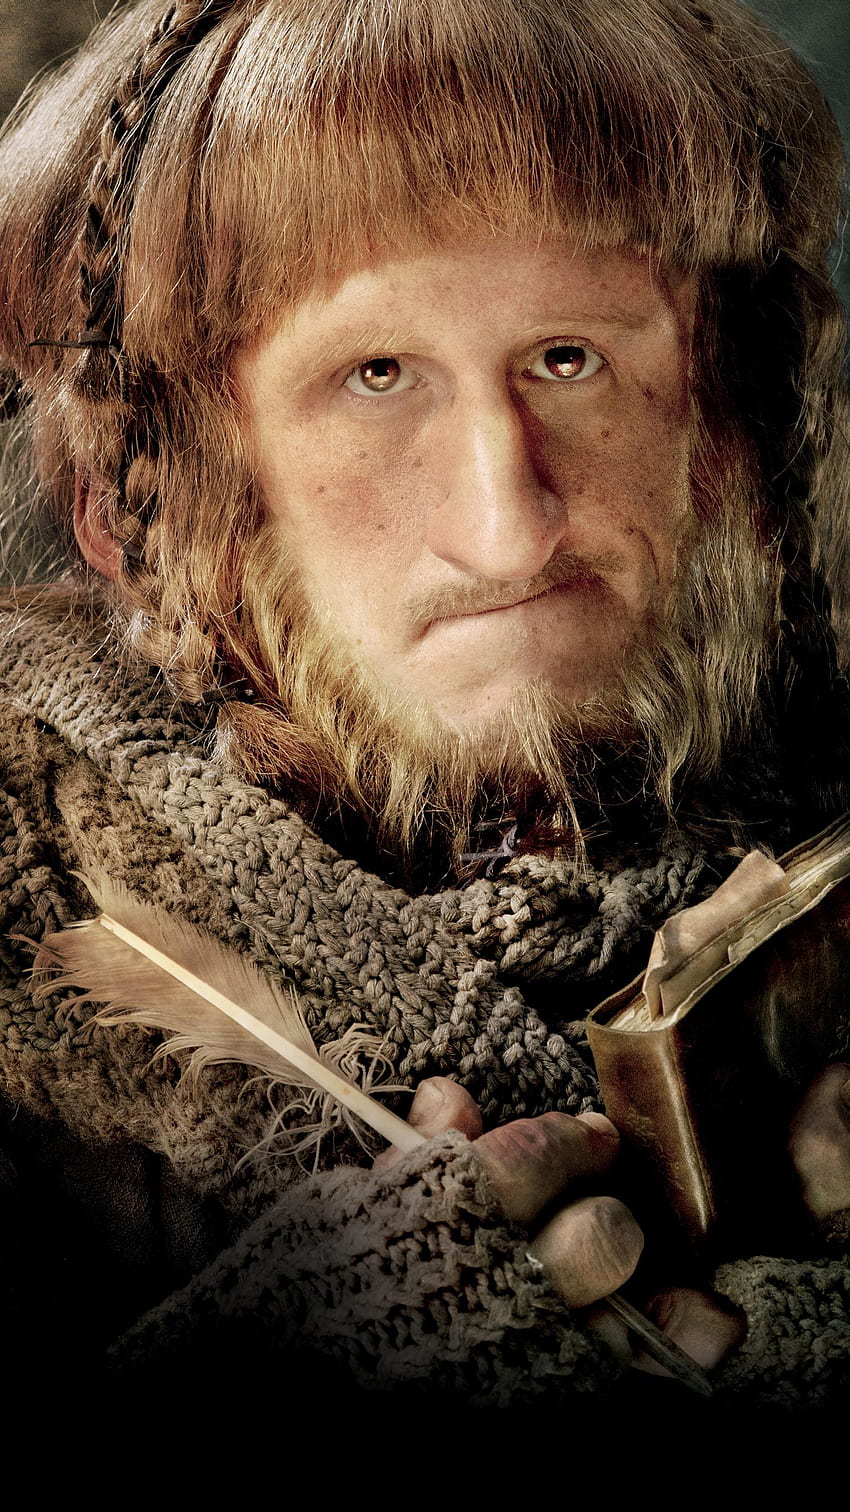 The Hobbit: An Unexpected Journey (2022) movie HD phone wallpaper